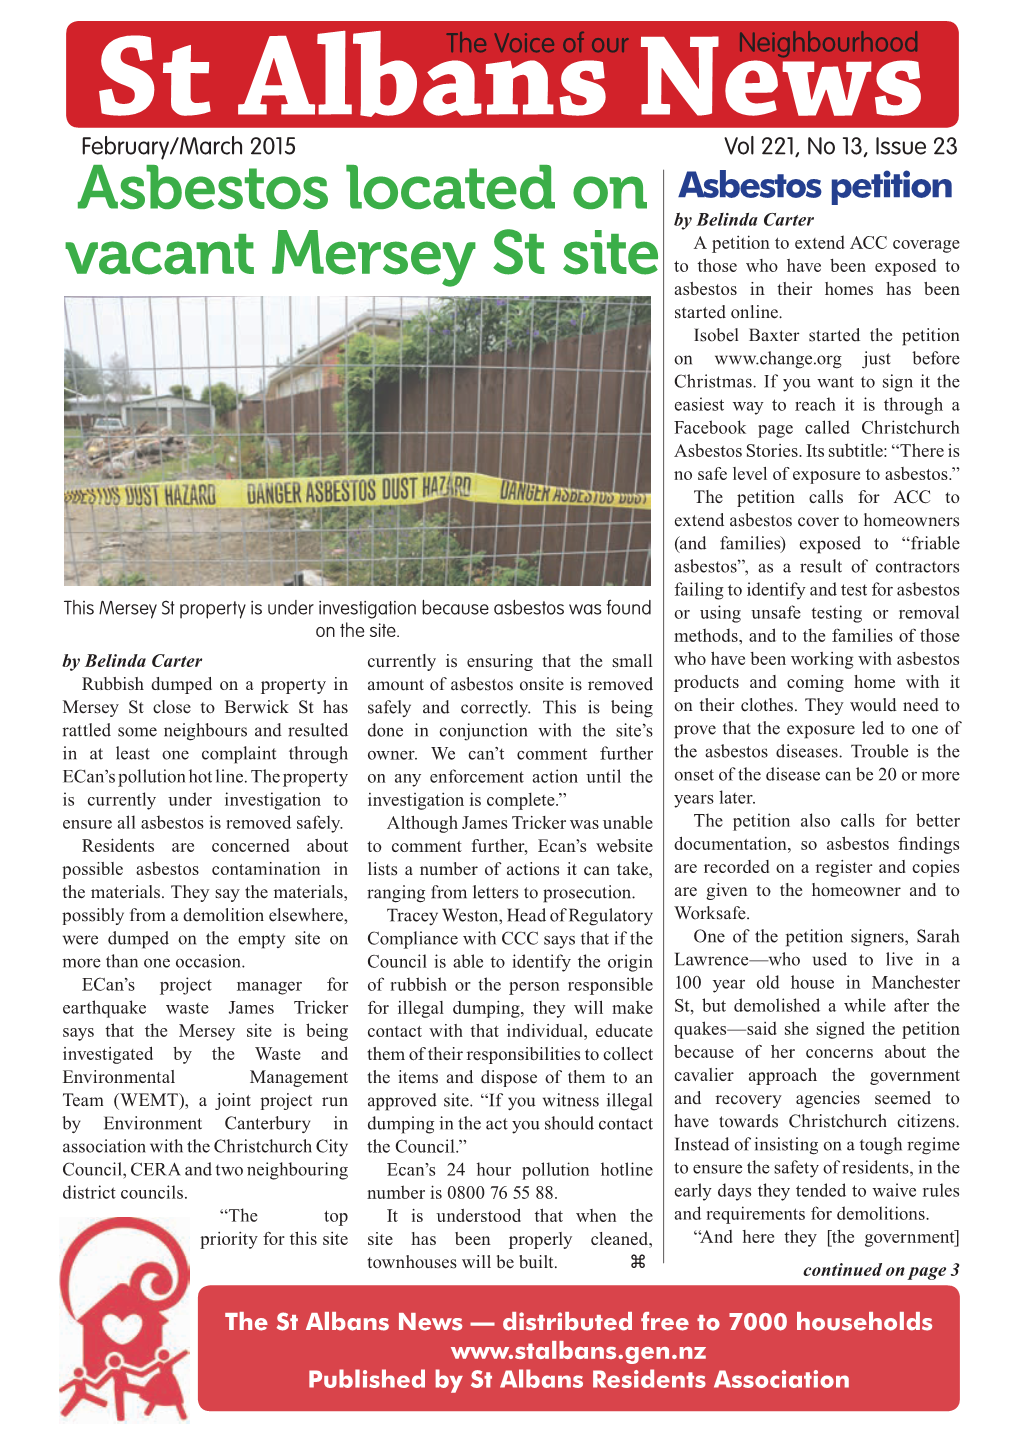 Asbestos Located on Vacant Mersey St Site